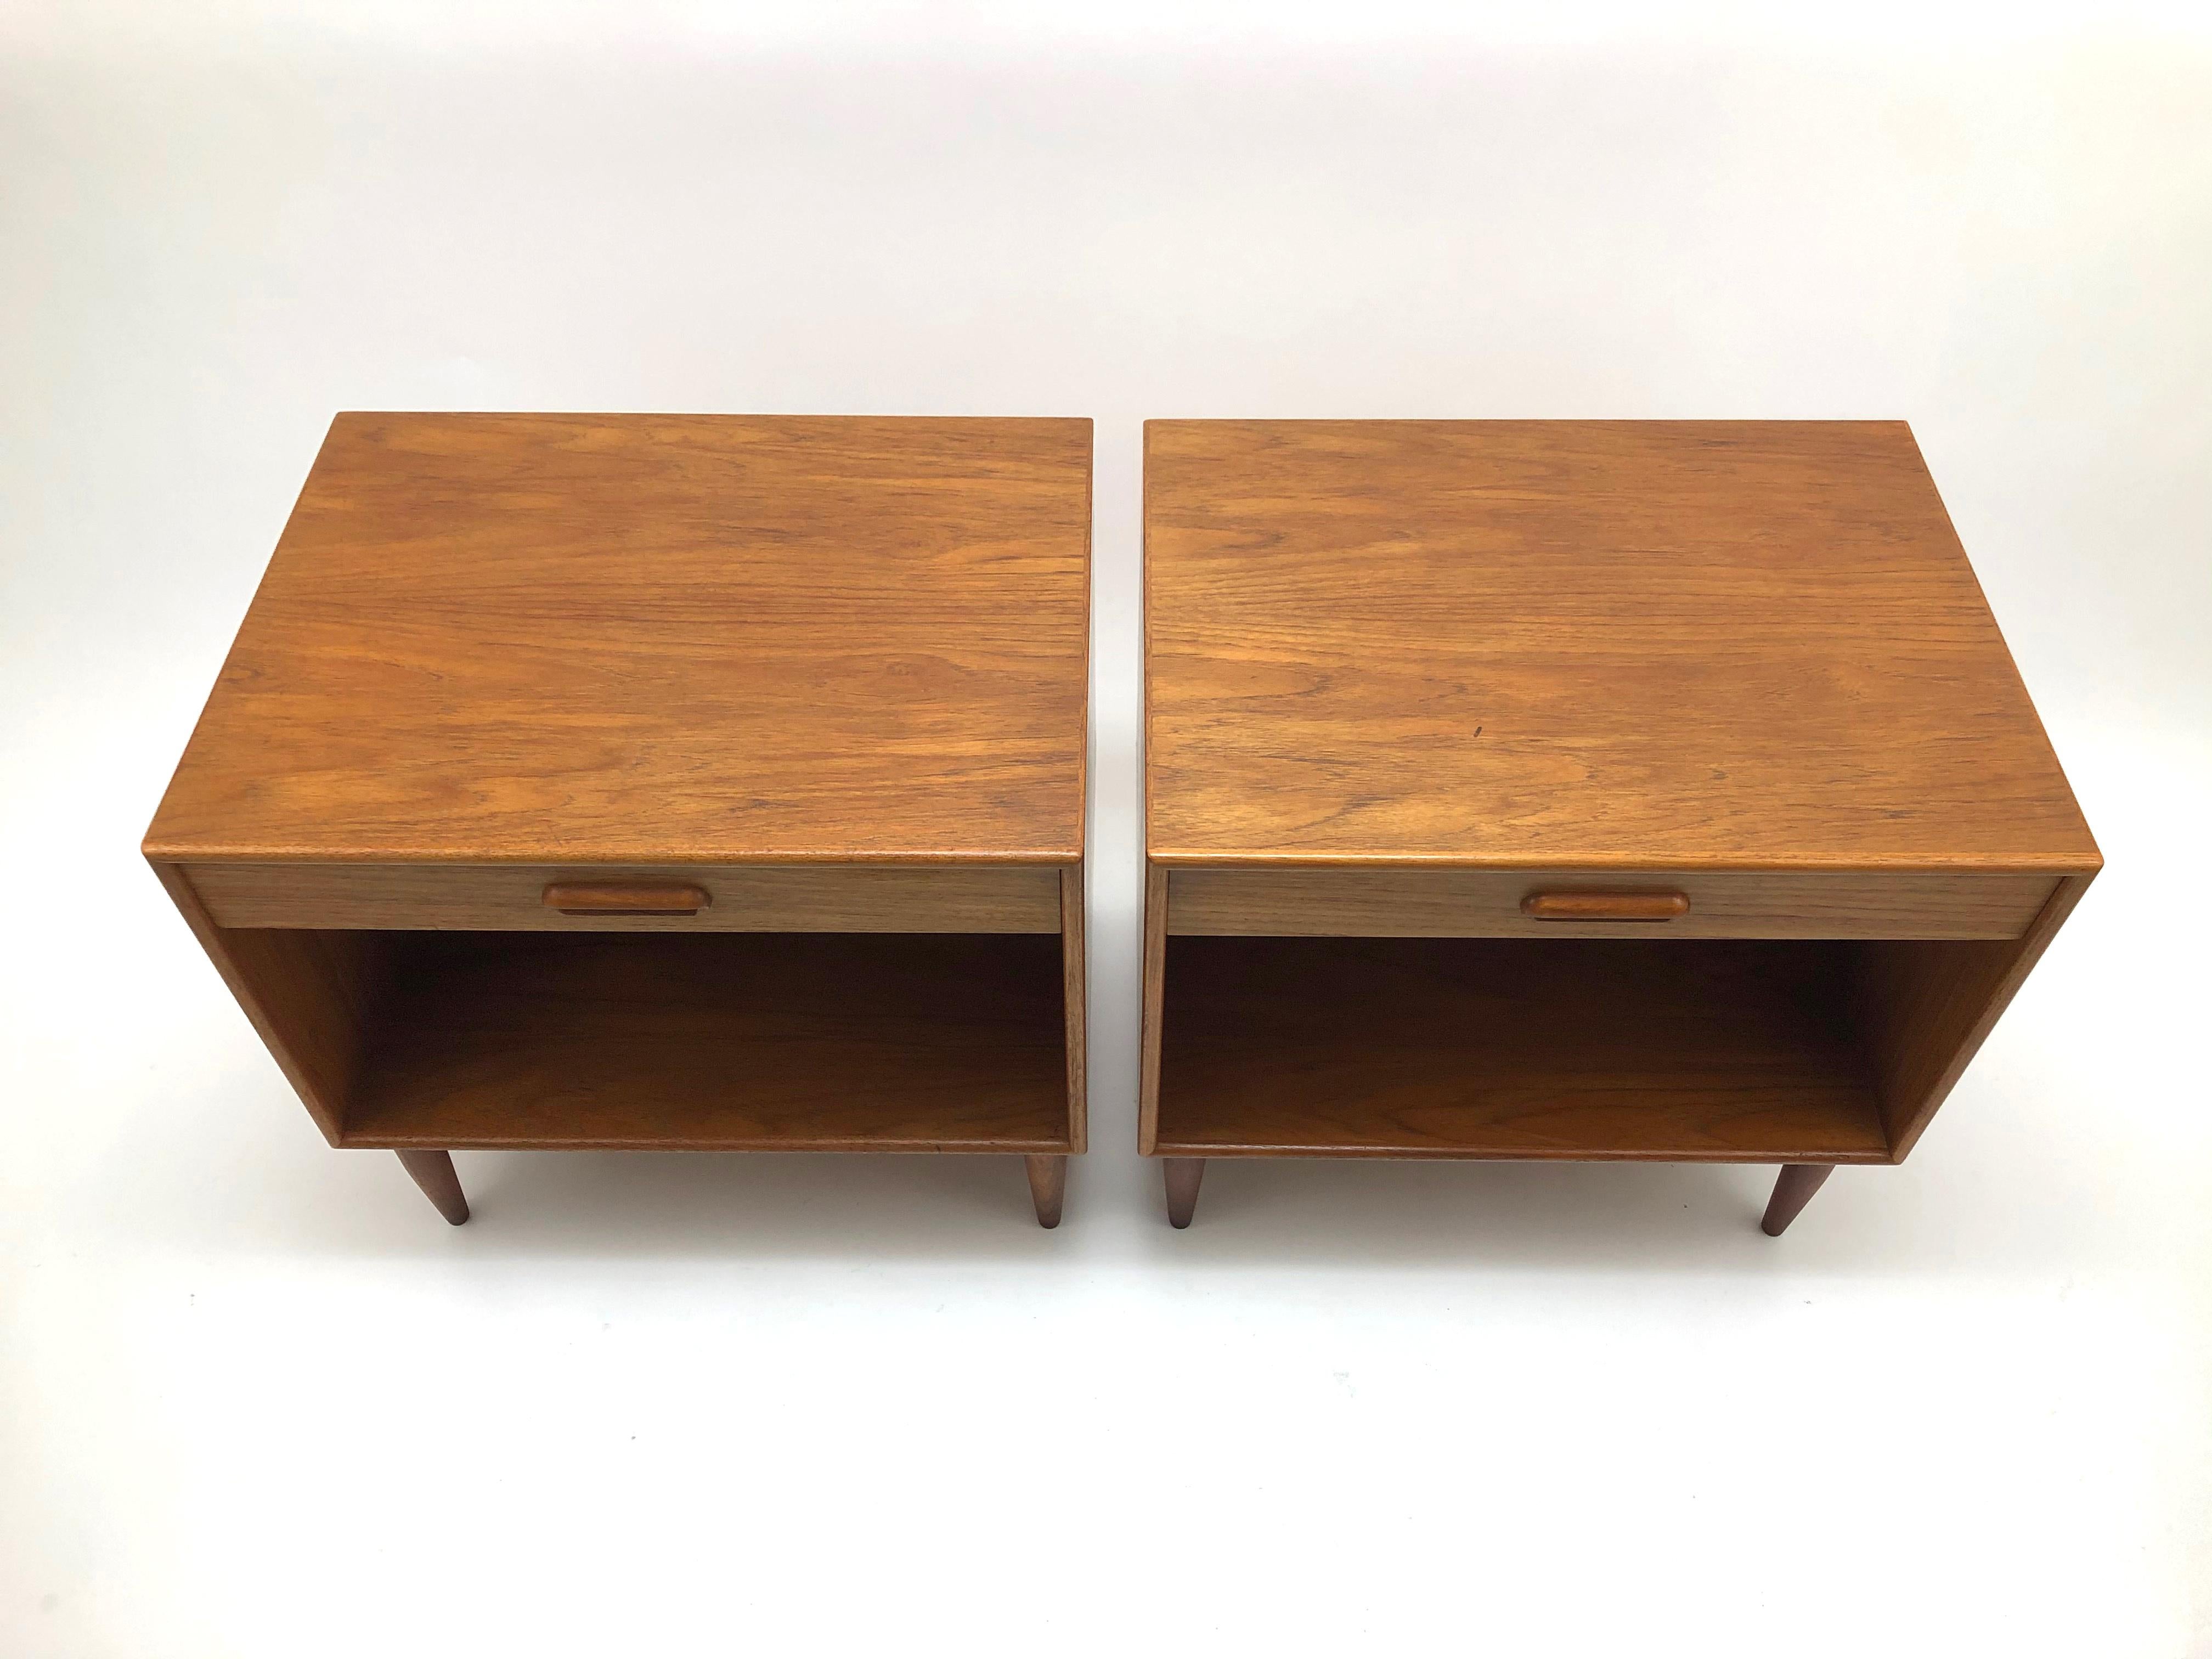 A rare pair of teak night stands by Hans C. Andersen for Gunnar Schwartz.

This handsome duo conveniently has pre-cut portals for bookshelf speaker wires and electronics cords.
   